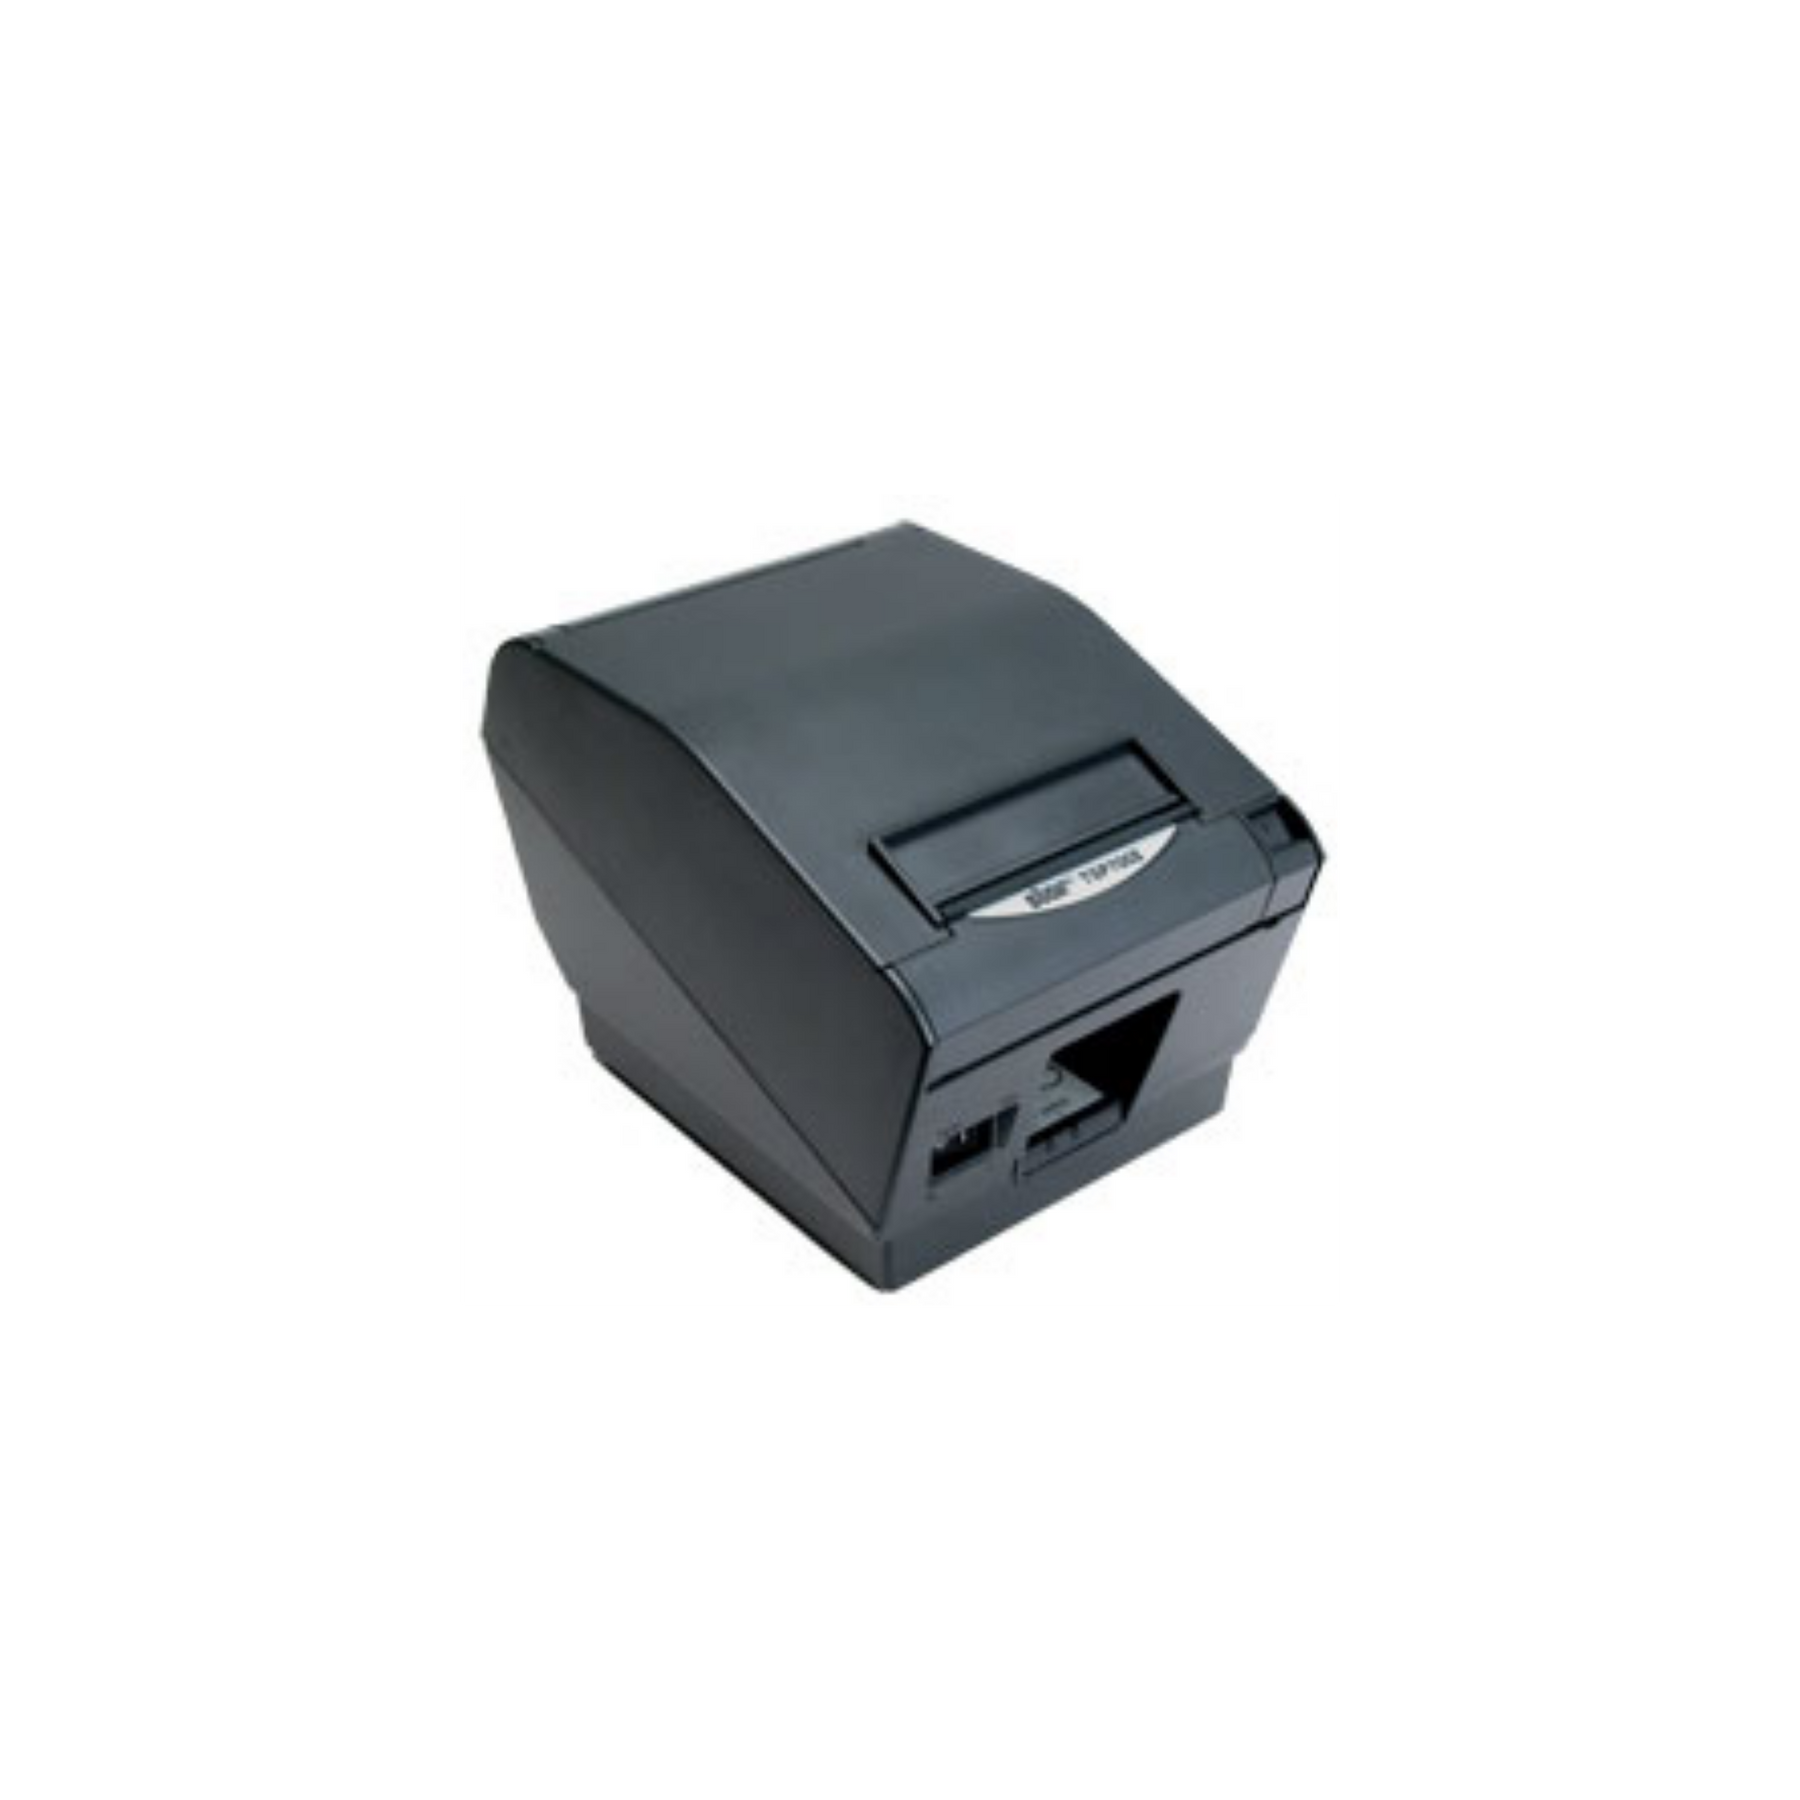 TSP700, High Speed Thermal and Label Printer, Auto-cutter, Ethernet (LAN), Gray